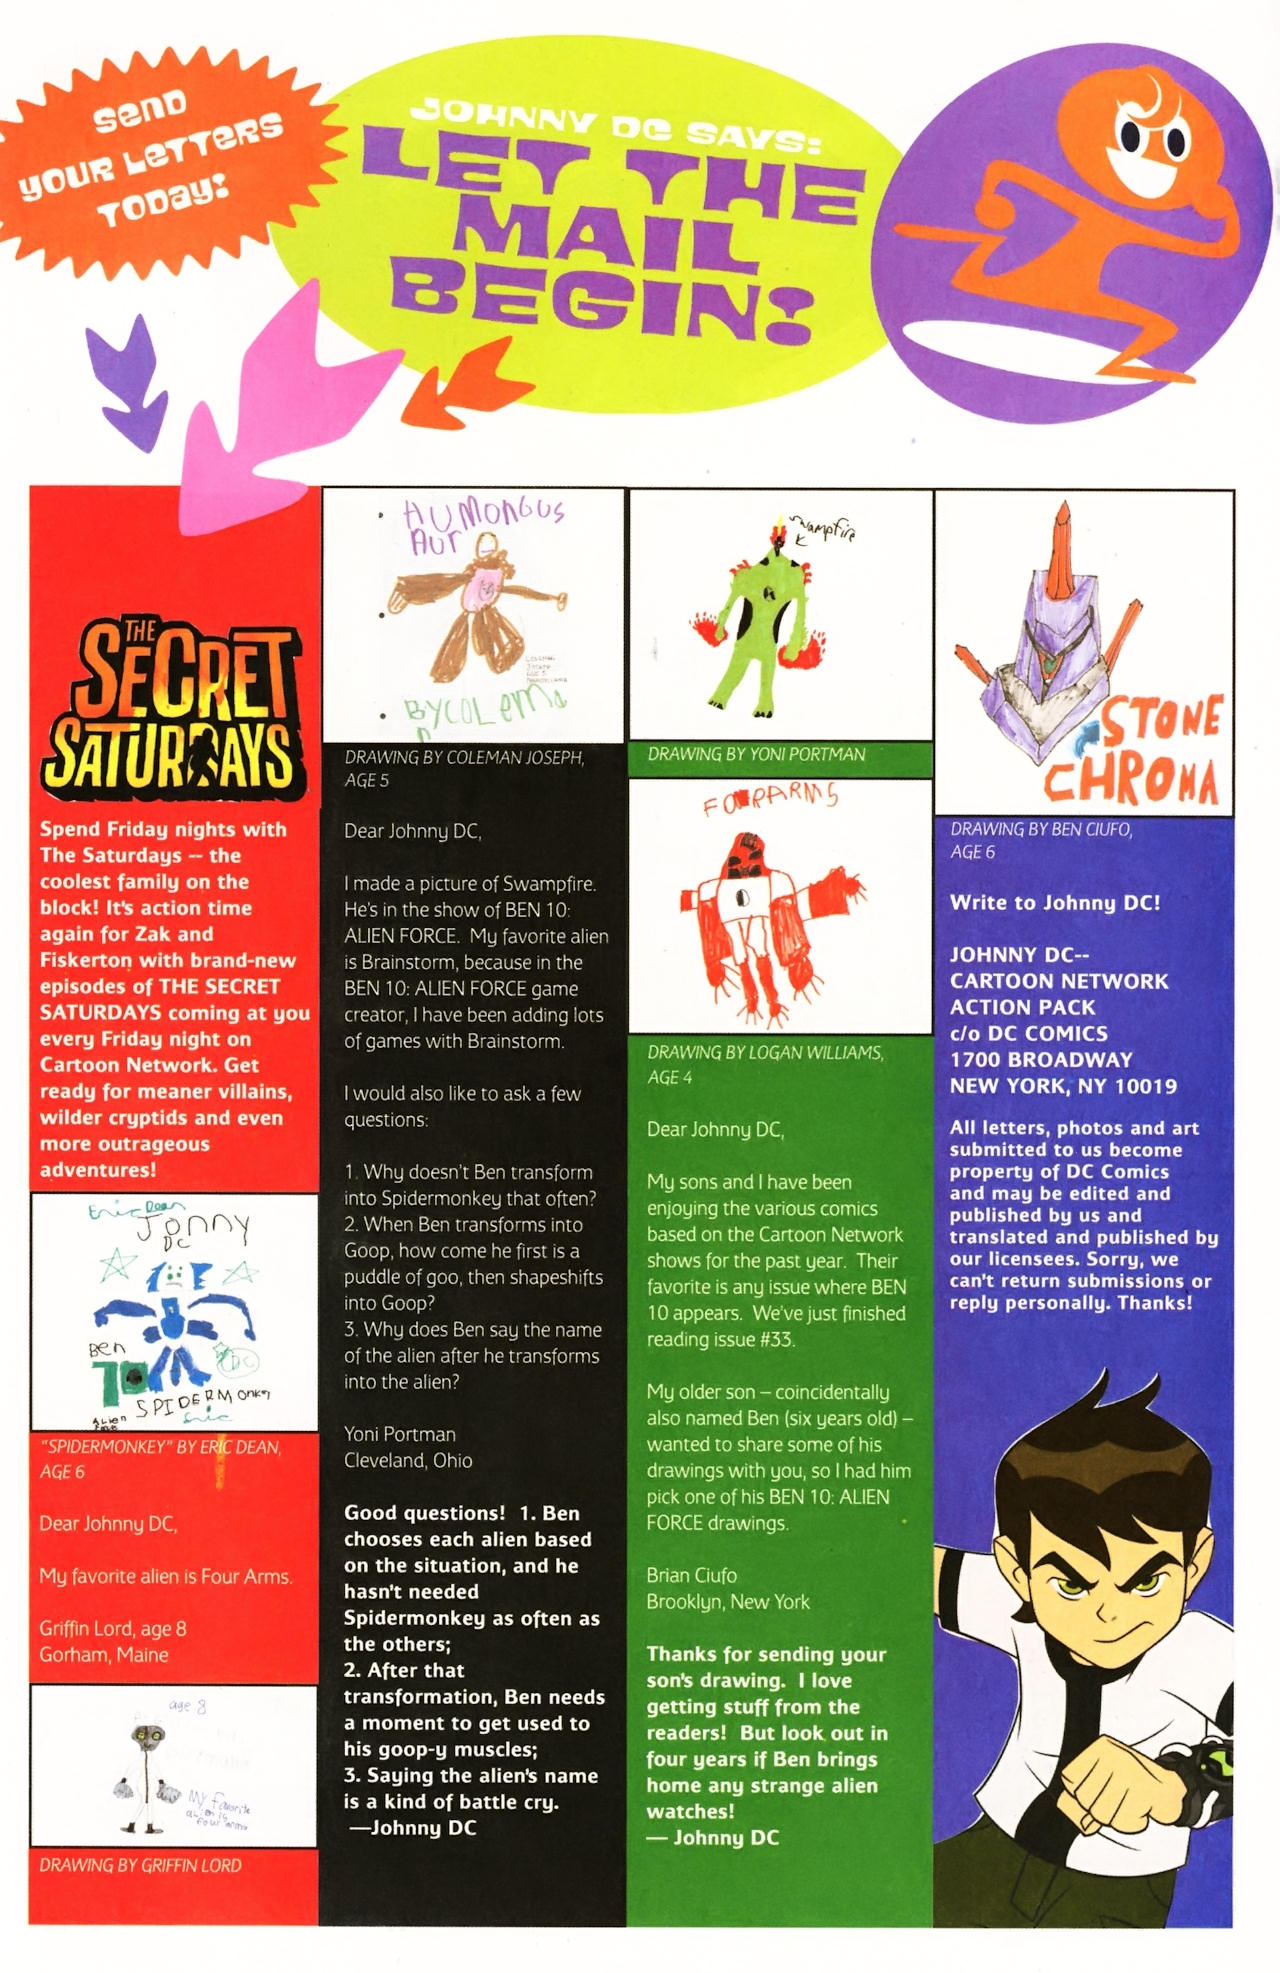 Read online Cartoon Network Action Pack comic -  Issue #37 - 33